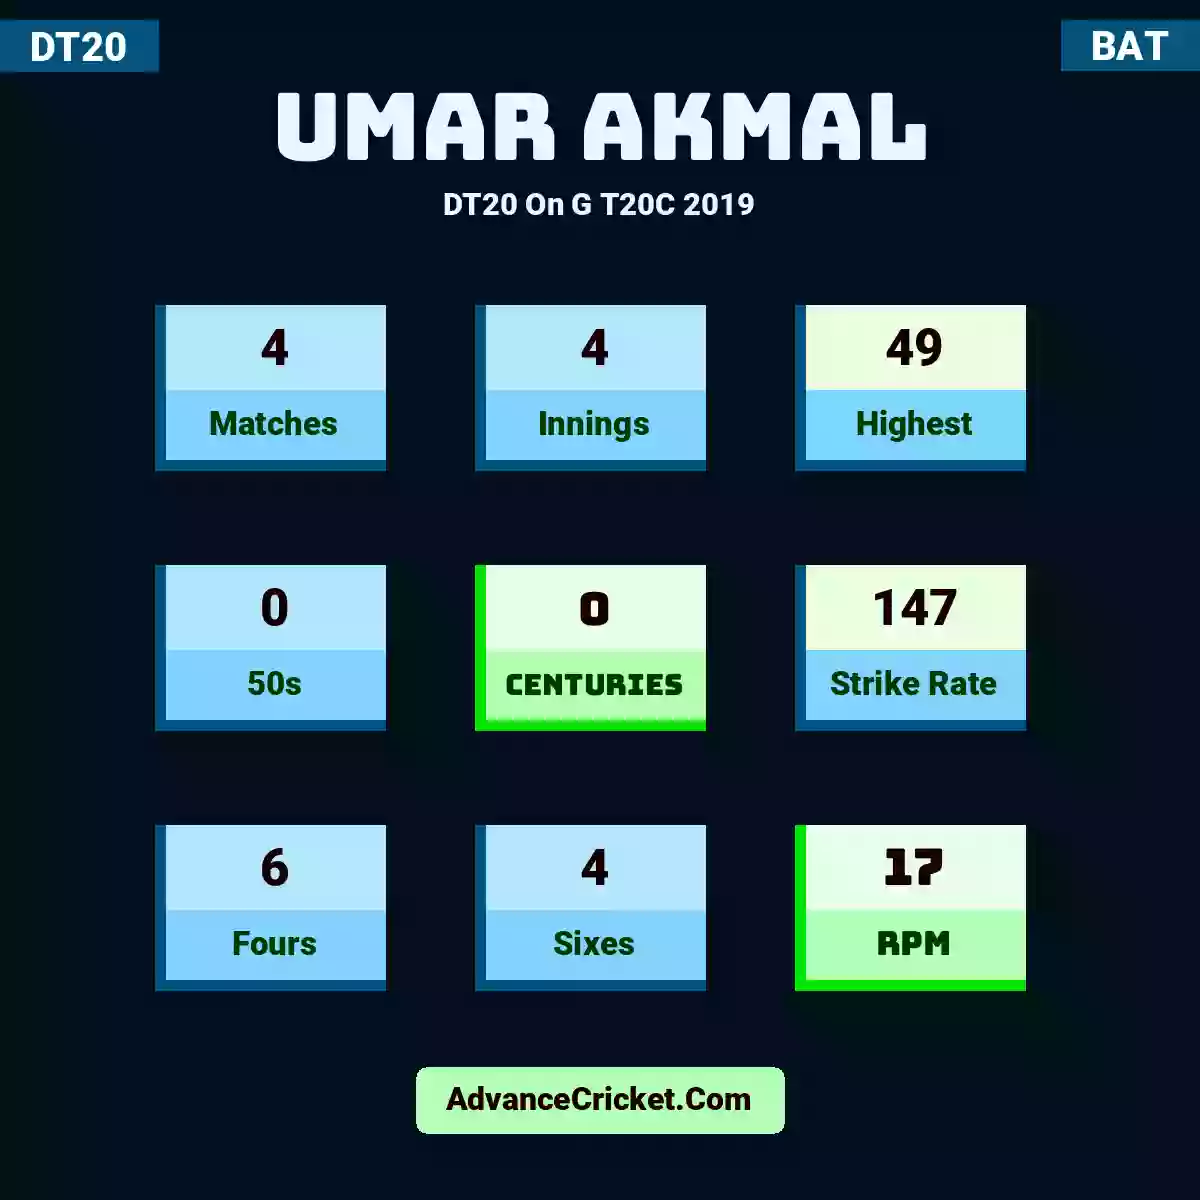 Umar Akmal DT20  On G T20C 2019, Umar Akmal played 4 matches, scored 49 runs as highest, 0 half-centuries, and 0 centuries, with a strike rate of 147. U.Akmal hit 6 fours and 4 sixes, with an RPM of 17.